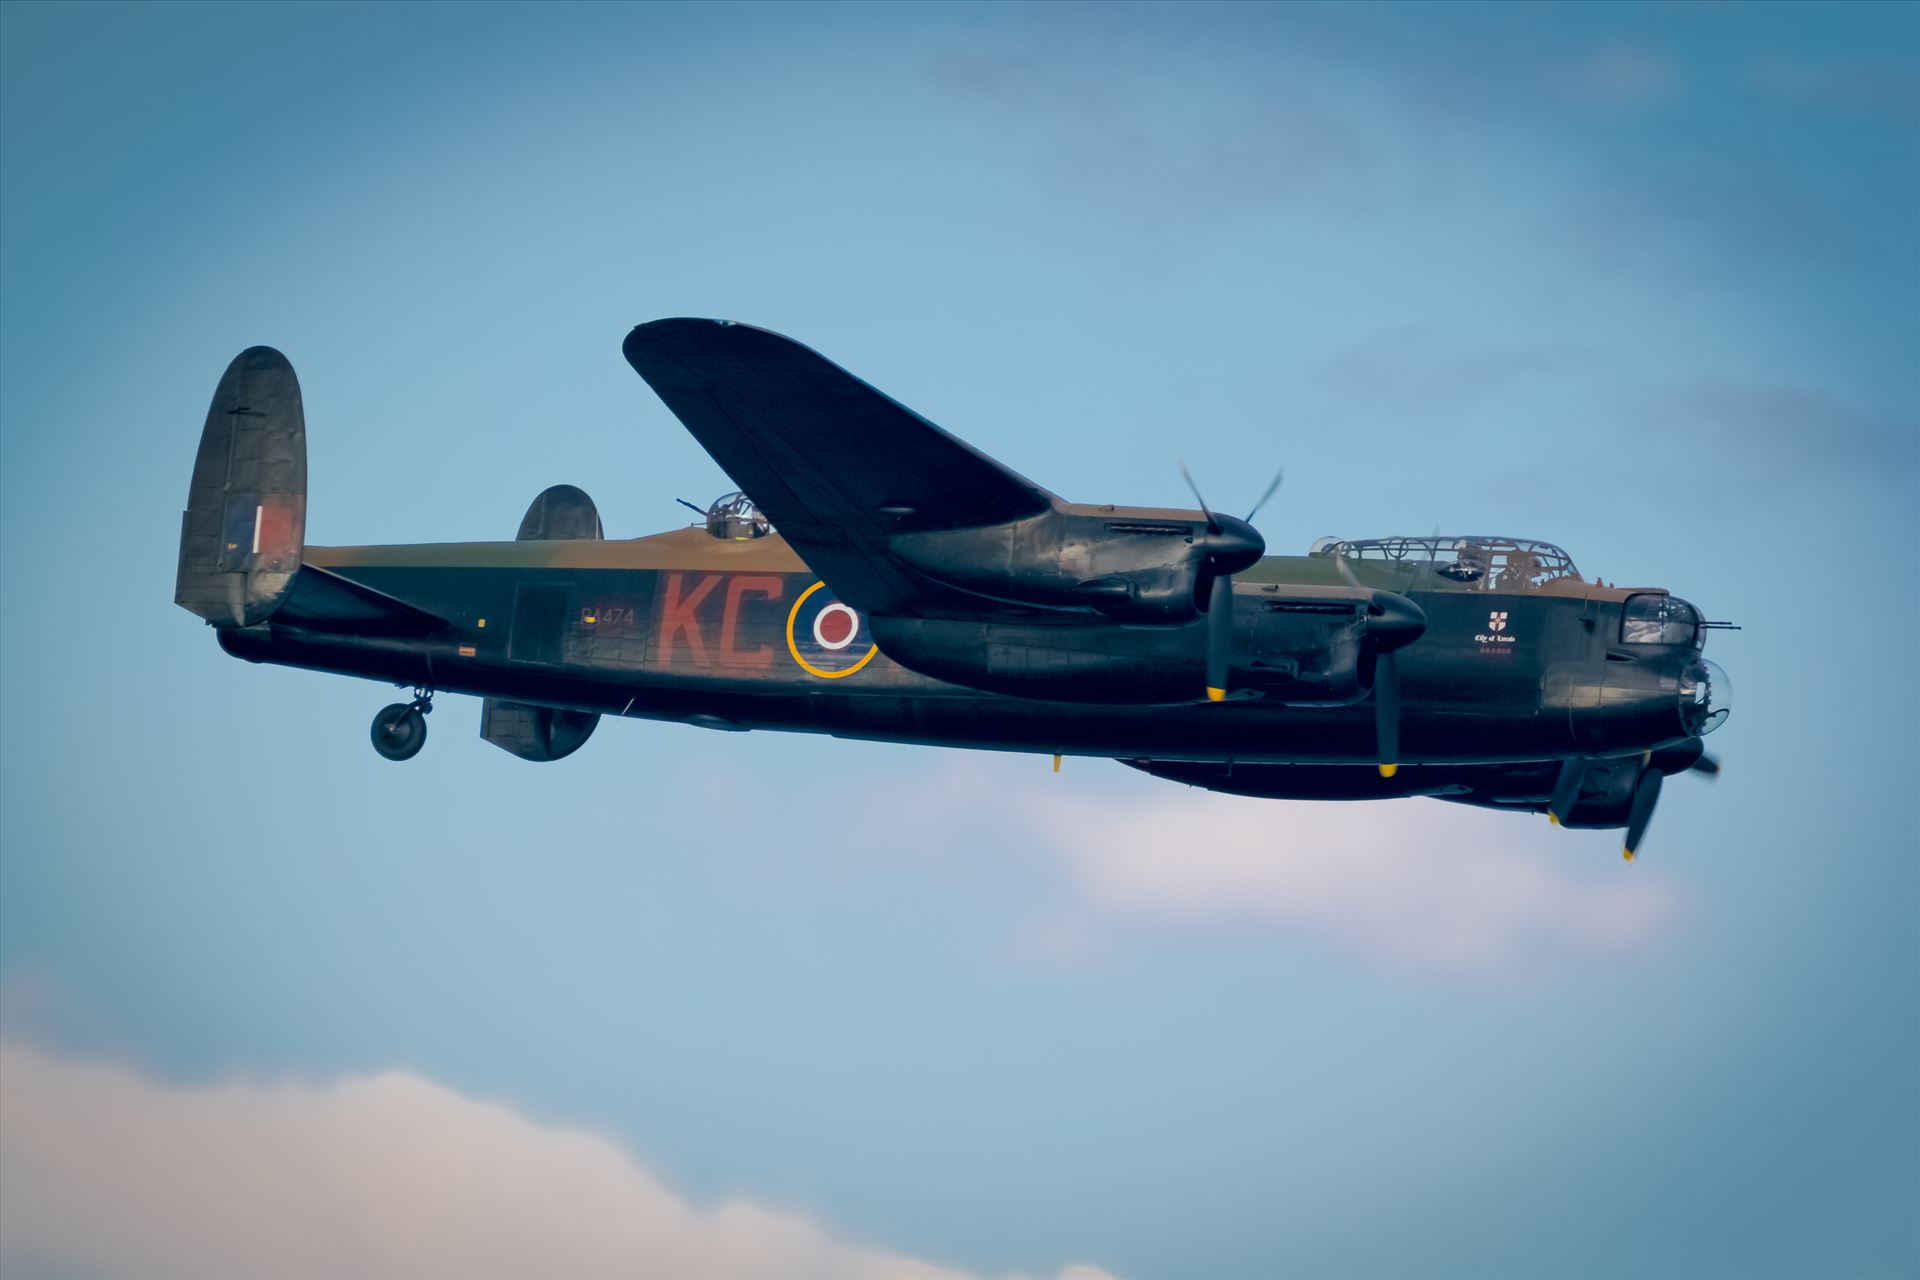 Lancaster Bomber - Fly past of one of the most Iconic Planes in history and World War II, the Lancaster Bomber by AJ Stoves Photography